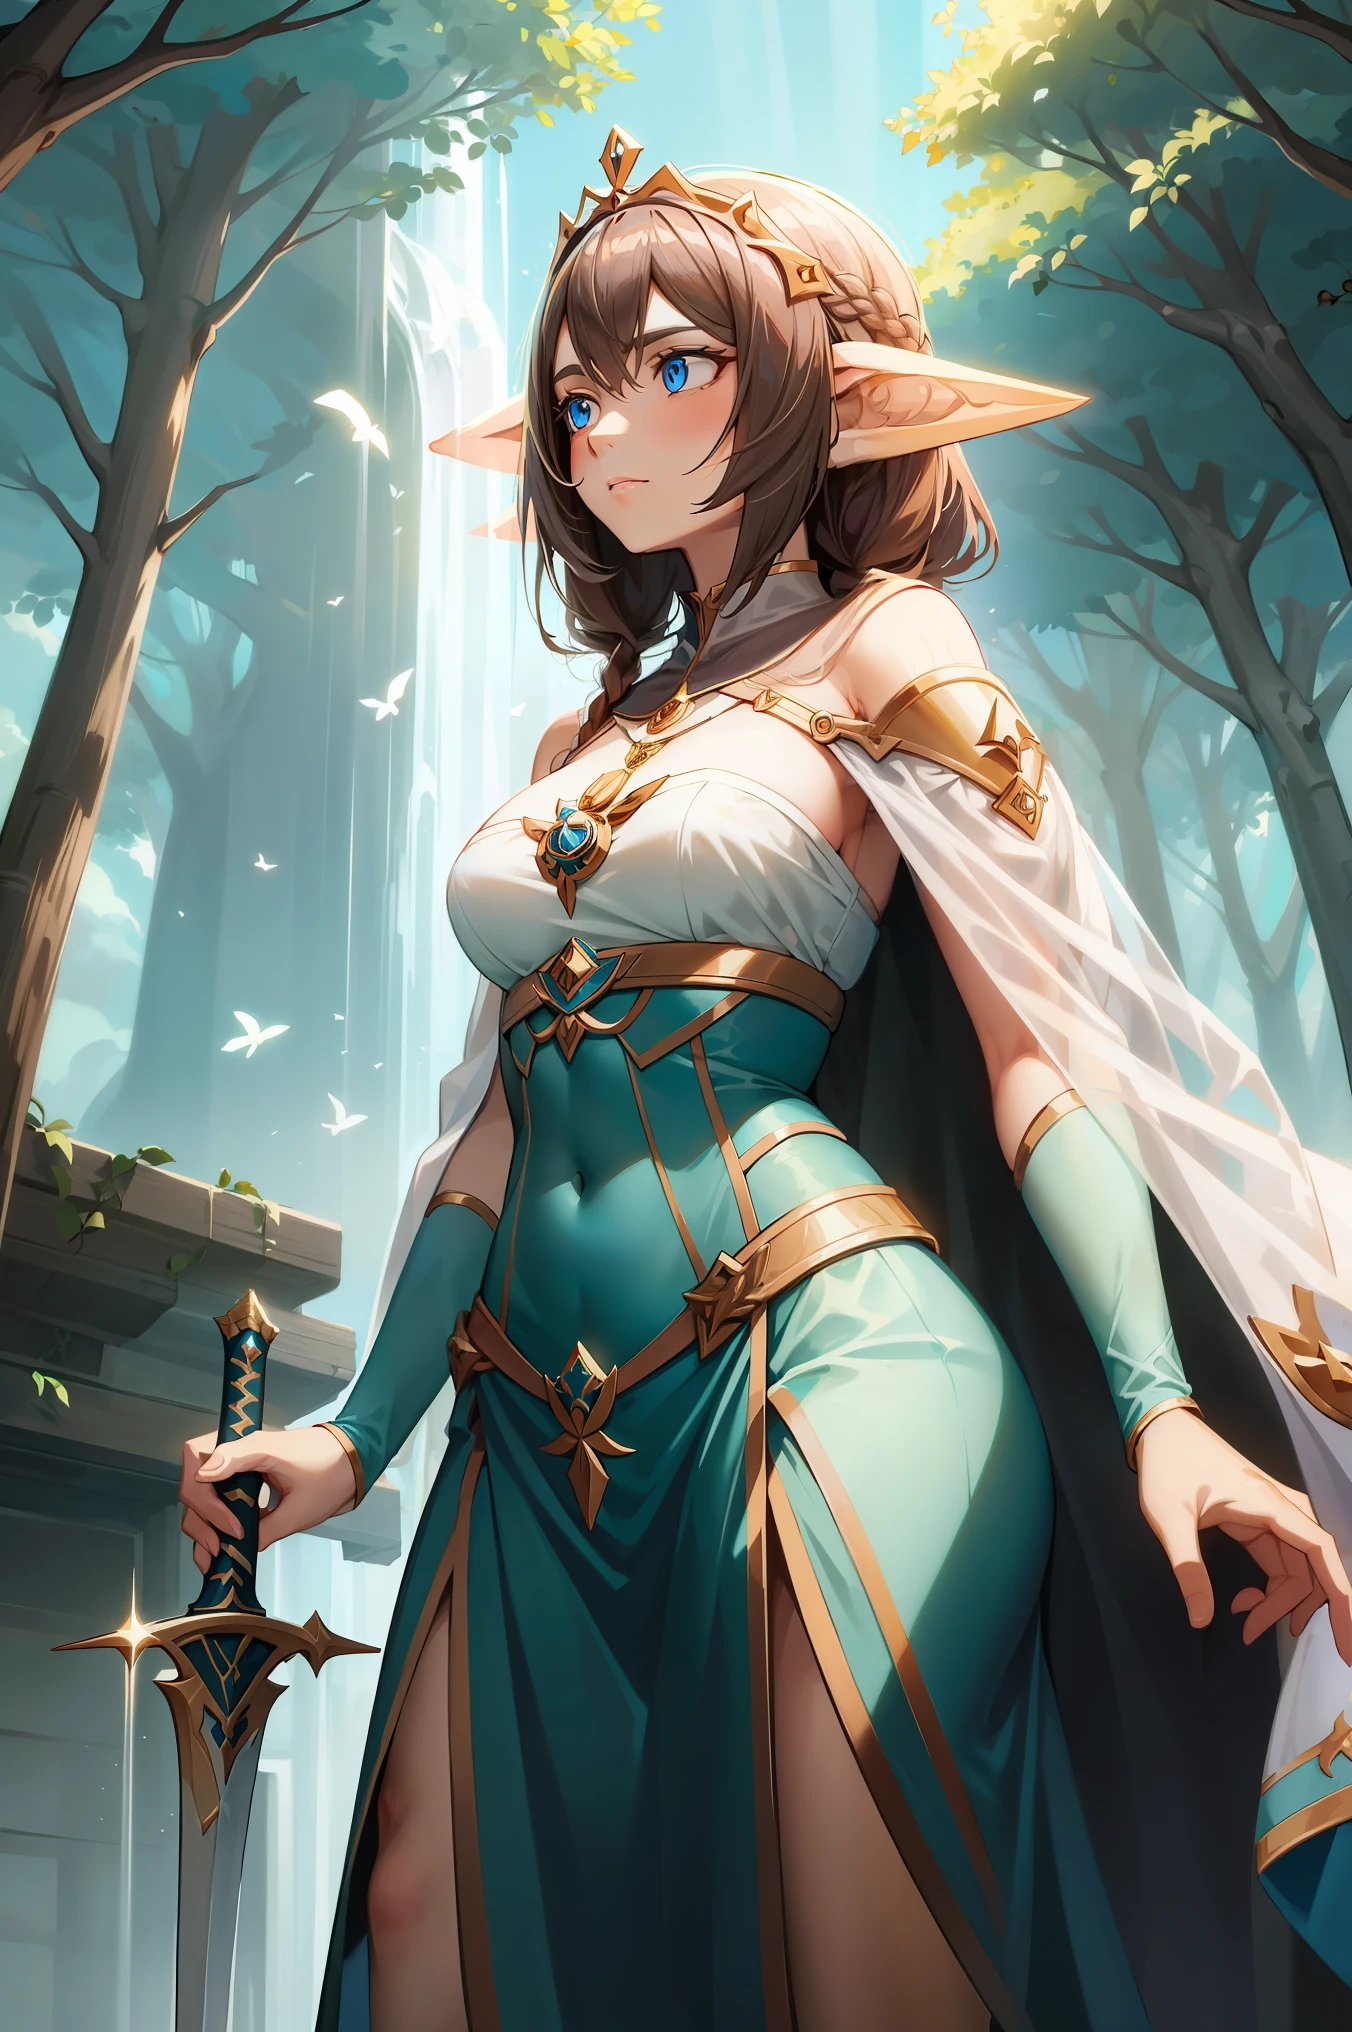 "Gera uma imagem no estilo anime, Inspirado em Genshin Impact, 1 mulher, Corpo todo, representing Seraphina Aelindë, a noble hospitable knight of the Order of Saint John of Jerusalem and an elf of profound beauty. Na imagem, Seraphina is standing in an ancient forest, Surrounded by tall and mysterious trees. Seu longo, Luminous brown hair falls in intricate braids over her shoulders, com brilhos dourados que magicamente capturam a luz. His intense, celestial blue eyes gaze with compassion and determination at the horizon.. He wears a black cloak with a white pate cross on his left chest., e um manto preto com capuz que se projetava levemente na brisa da floresta. Your hands gracefully hold the hilt of a sword, symbolizing their bravery and commitment to protection. The image captures Serafhina&#39;s serene and noble presence, as she radiates a deep connection with nature and the magic that surrounds her."